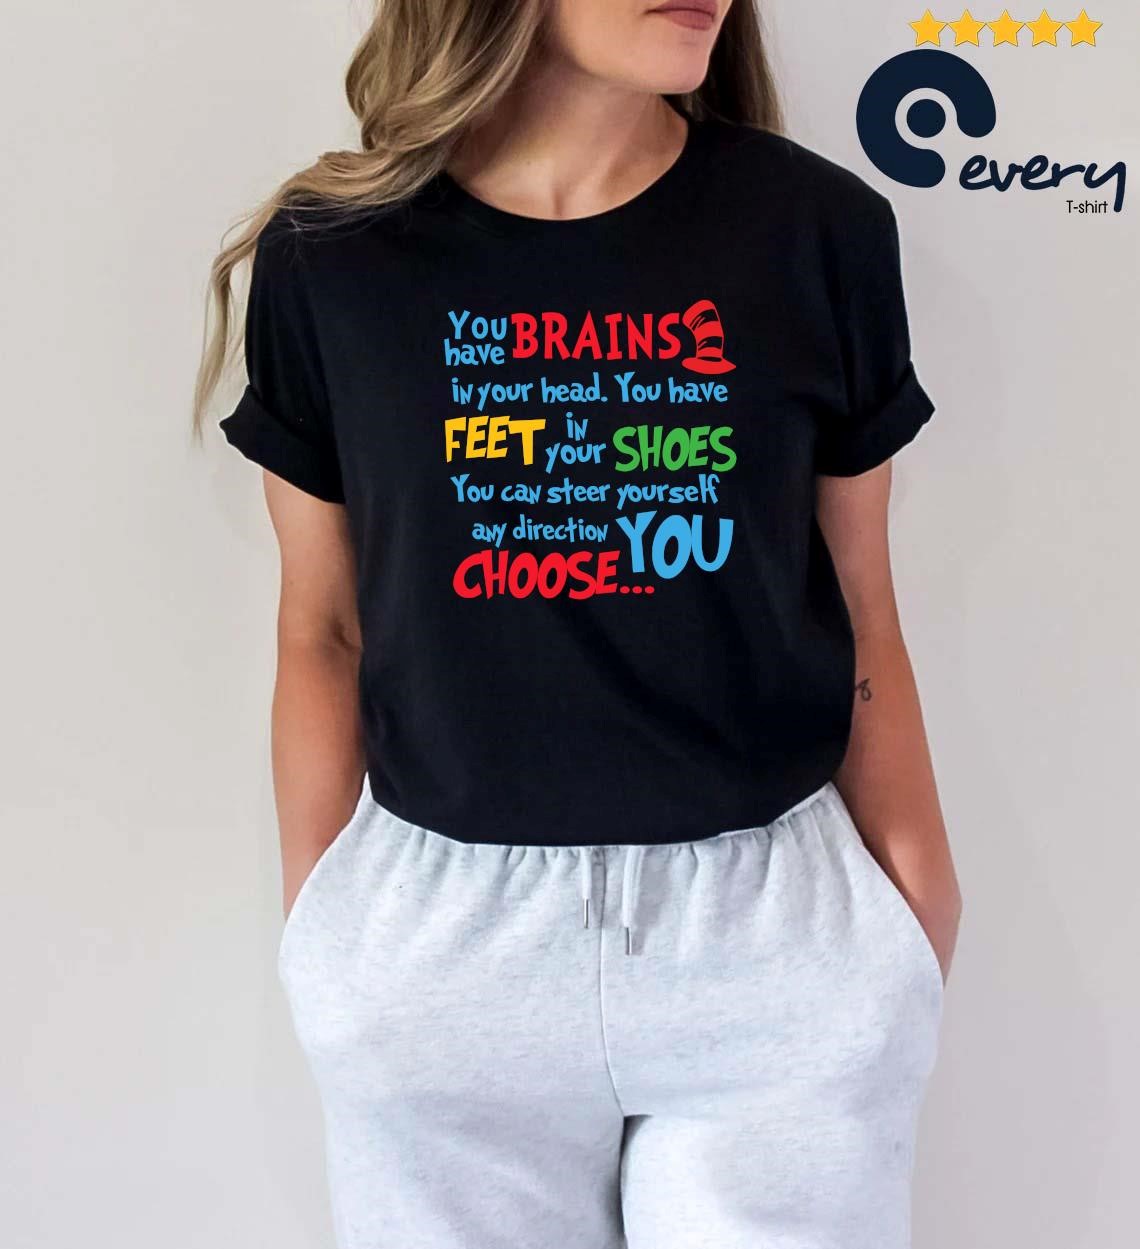 2023 Dr Seuss You Have Brains In Your Head You Have Feet In Your Shoes Shirt